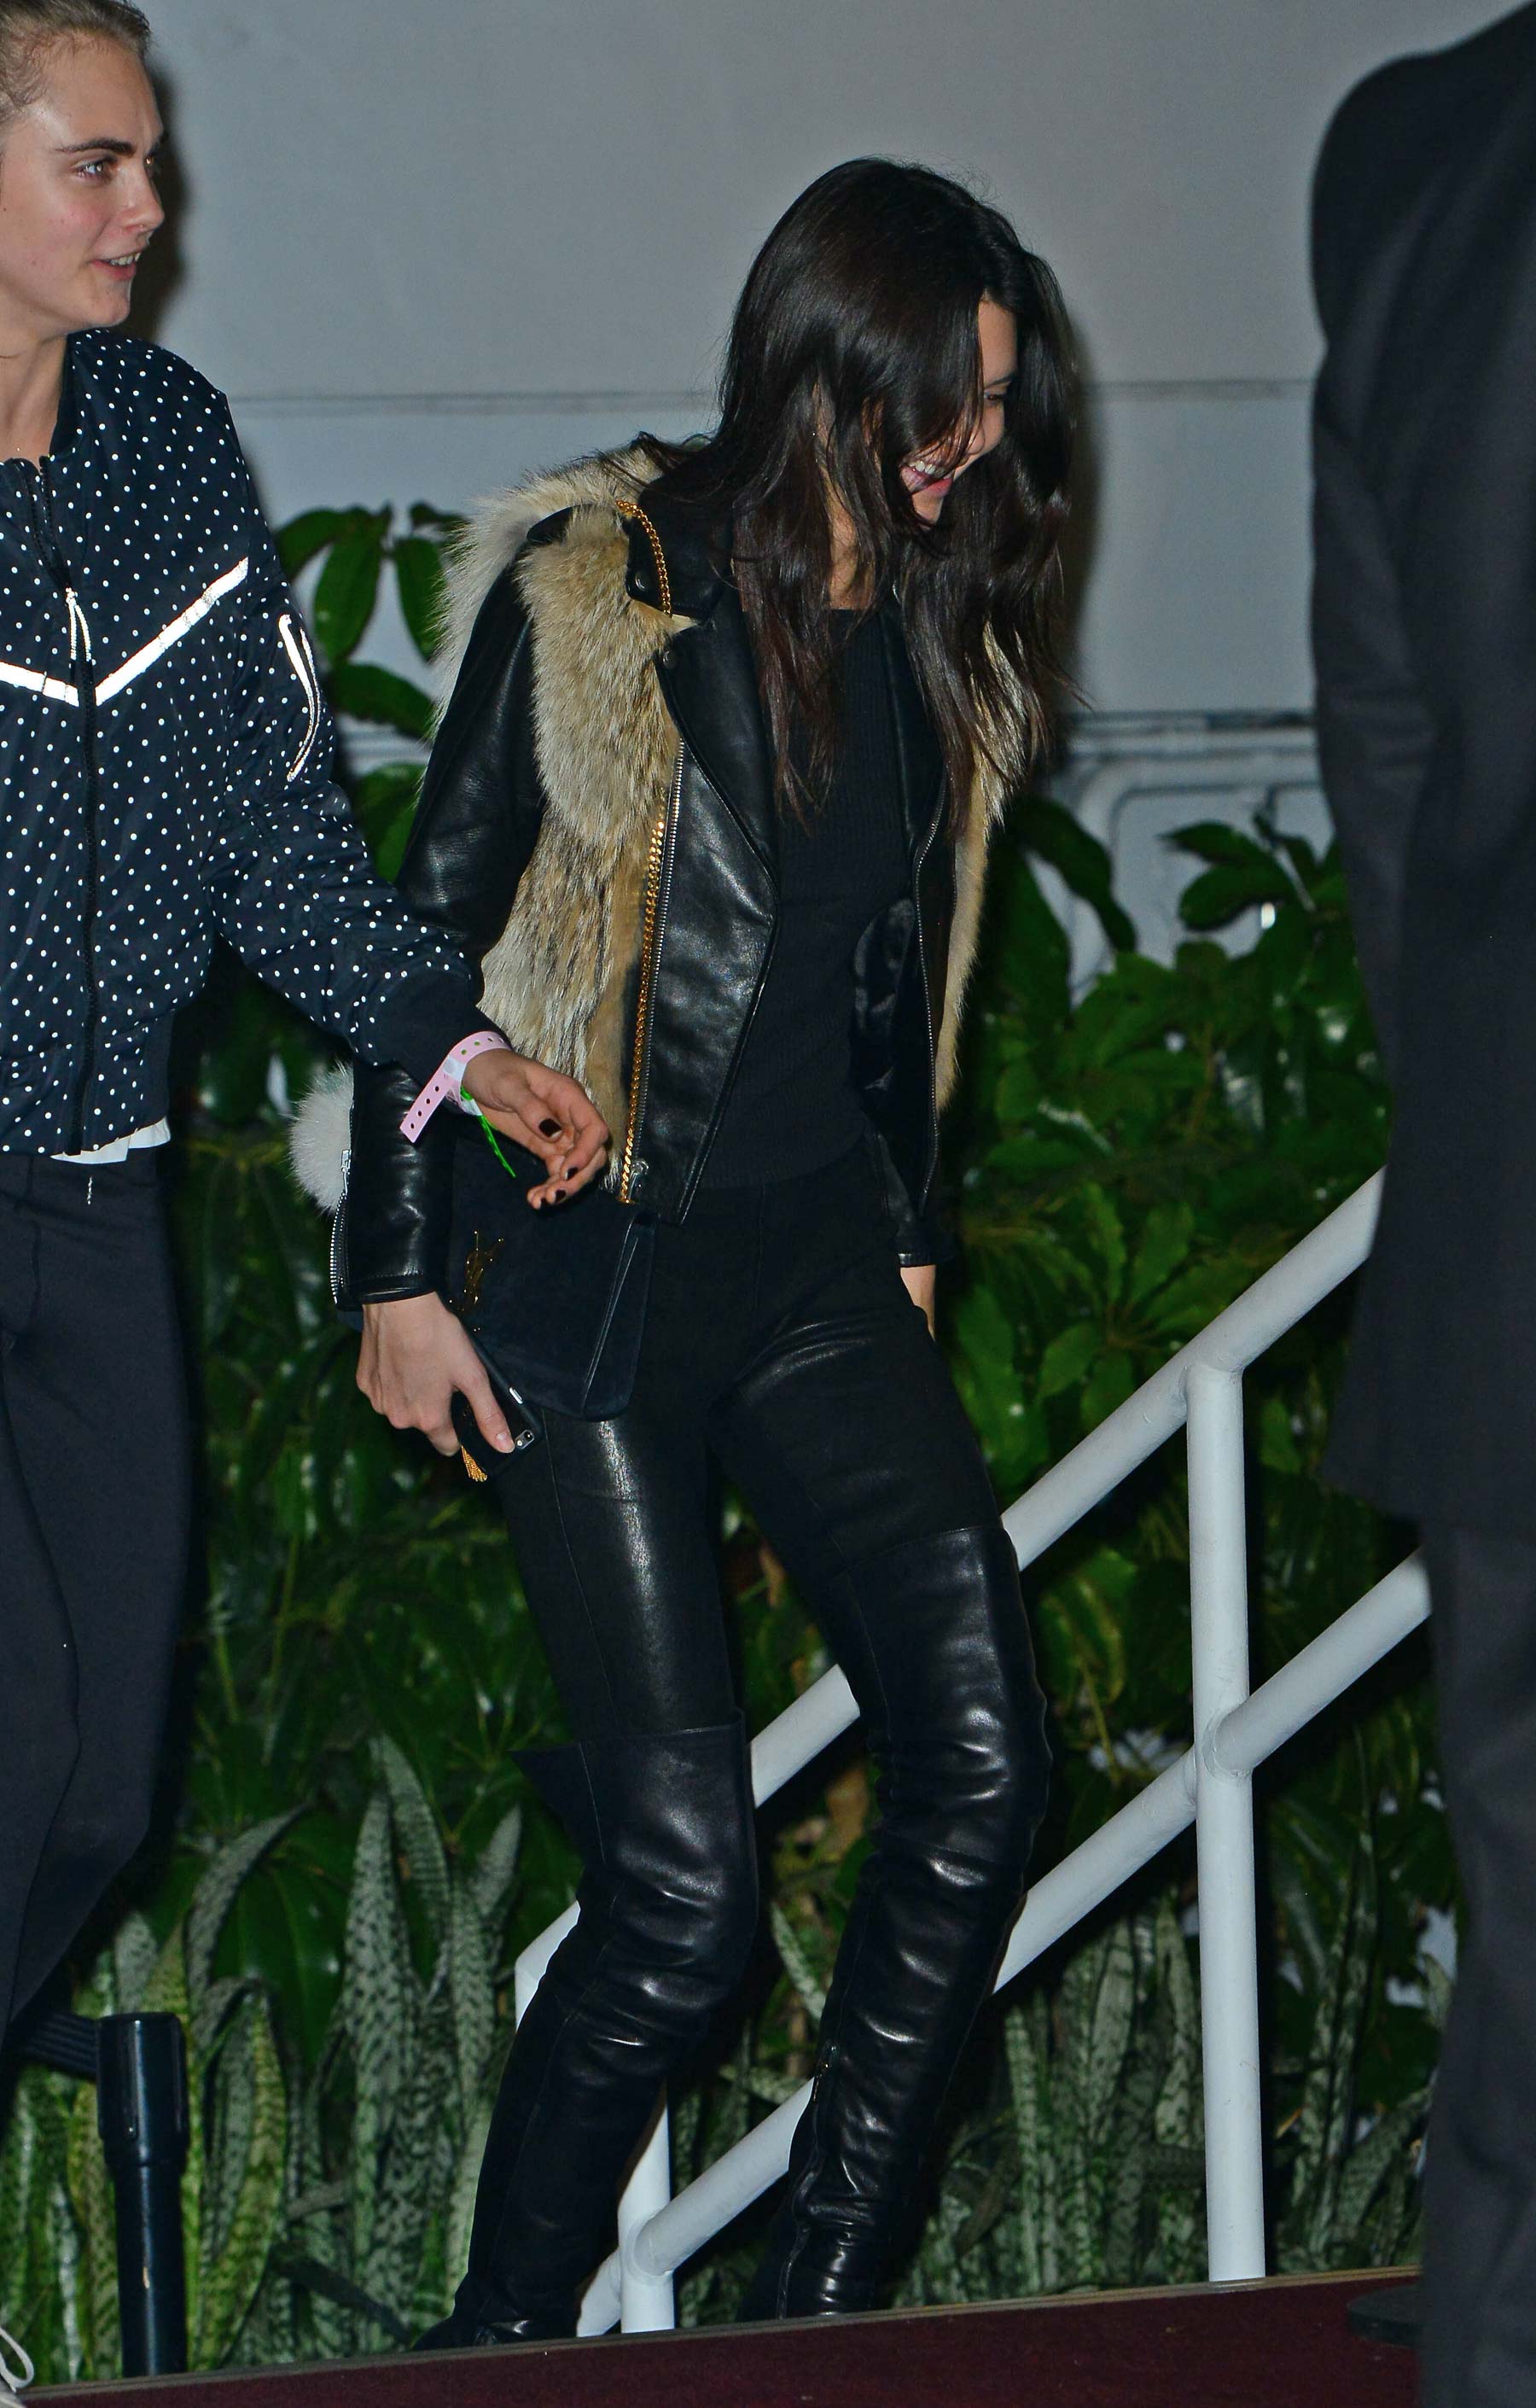 Kendall Jenner leaving The Weeknd’s concert in LA